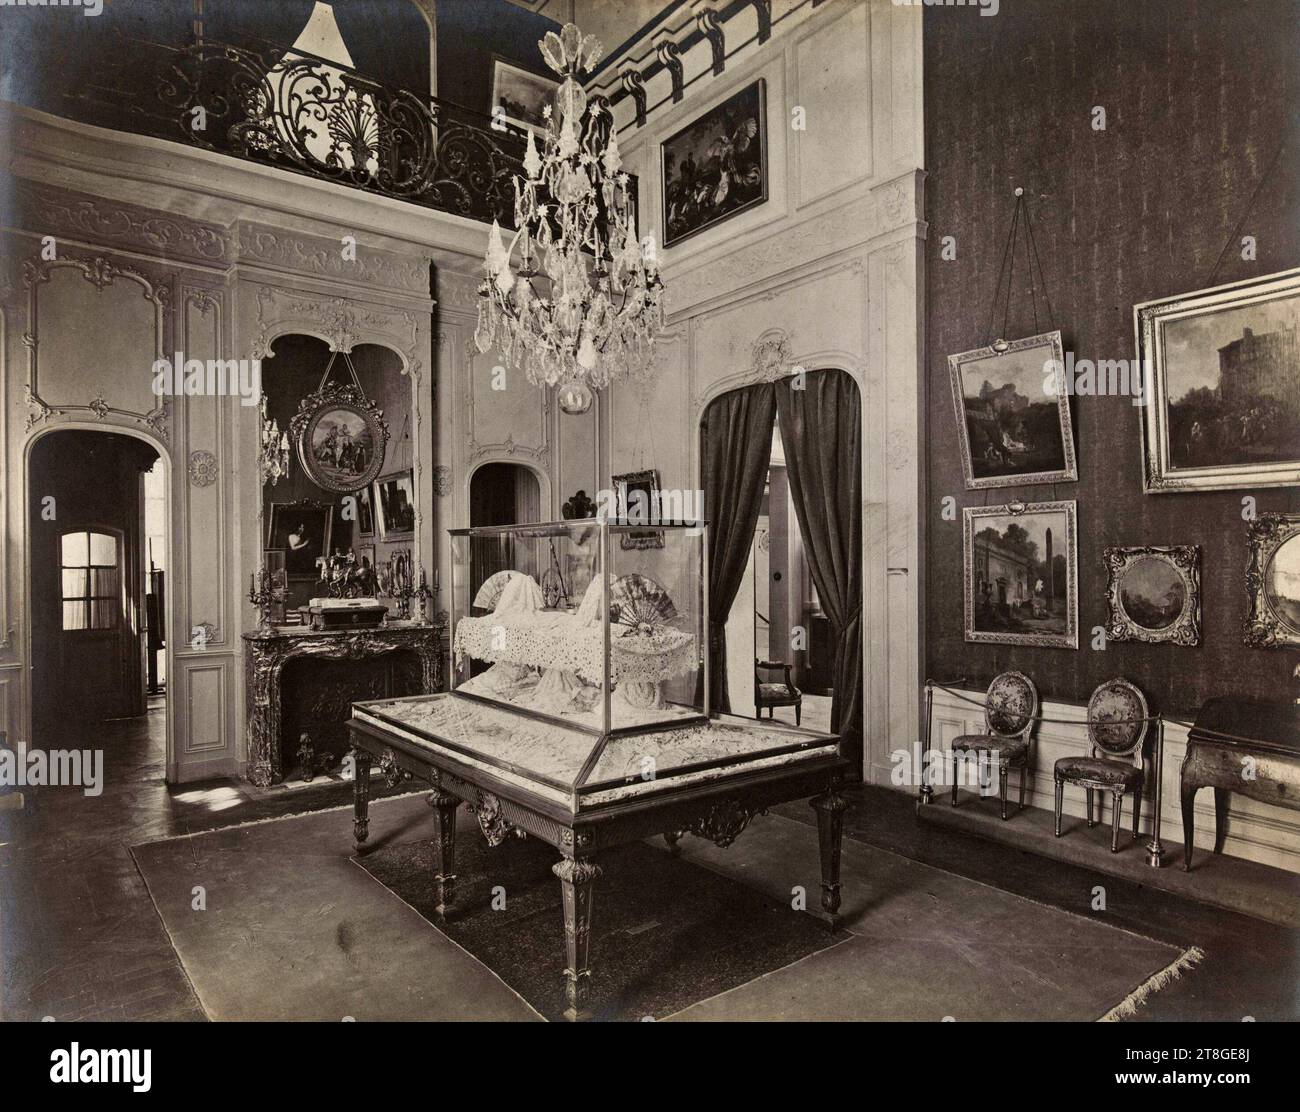 Interior View of a Museum Displaying Fans in a Window, Photographer, 20th century, Photography, Graphic Arts, Photography, Gelatino silver bromide print, Dimensions - Work: Height: 22.4 cm, Width: 28.4 cm Stock Photo